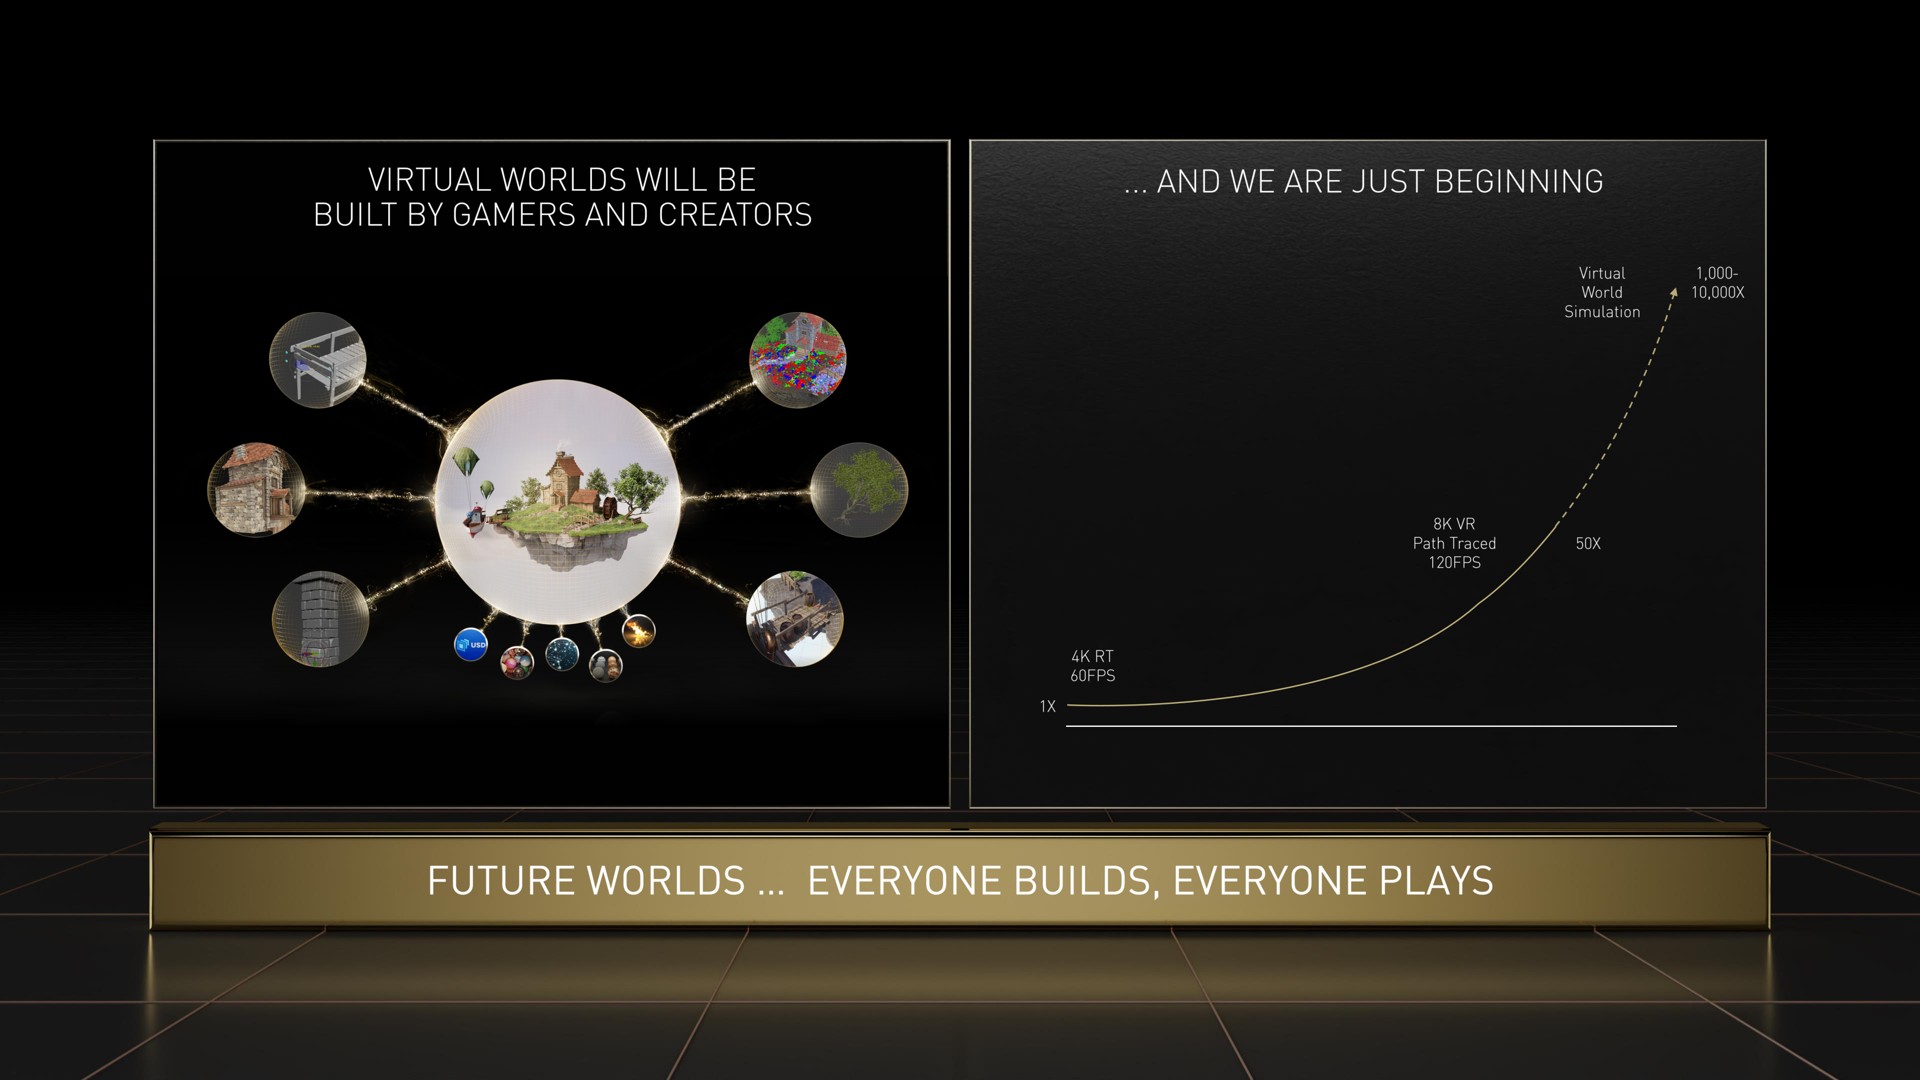 virtual worlds will be built by and creators and we are just beginning | NVIDIA